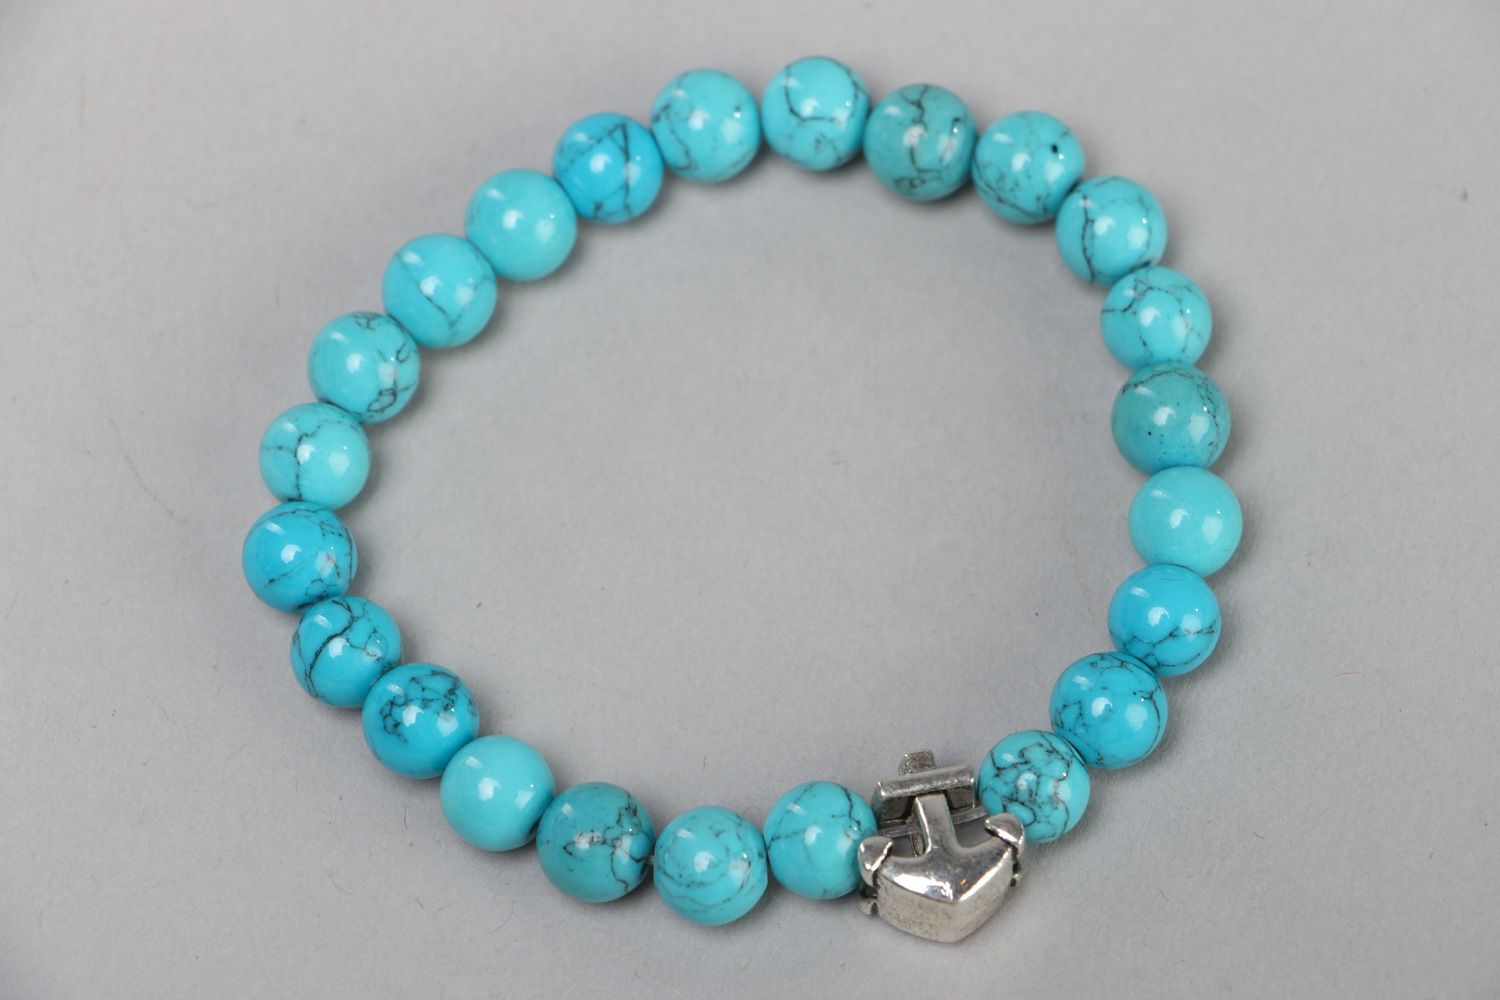 Handmade wrist stretch bracelet with turquoise beads and metal anchor charm photo 1